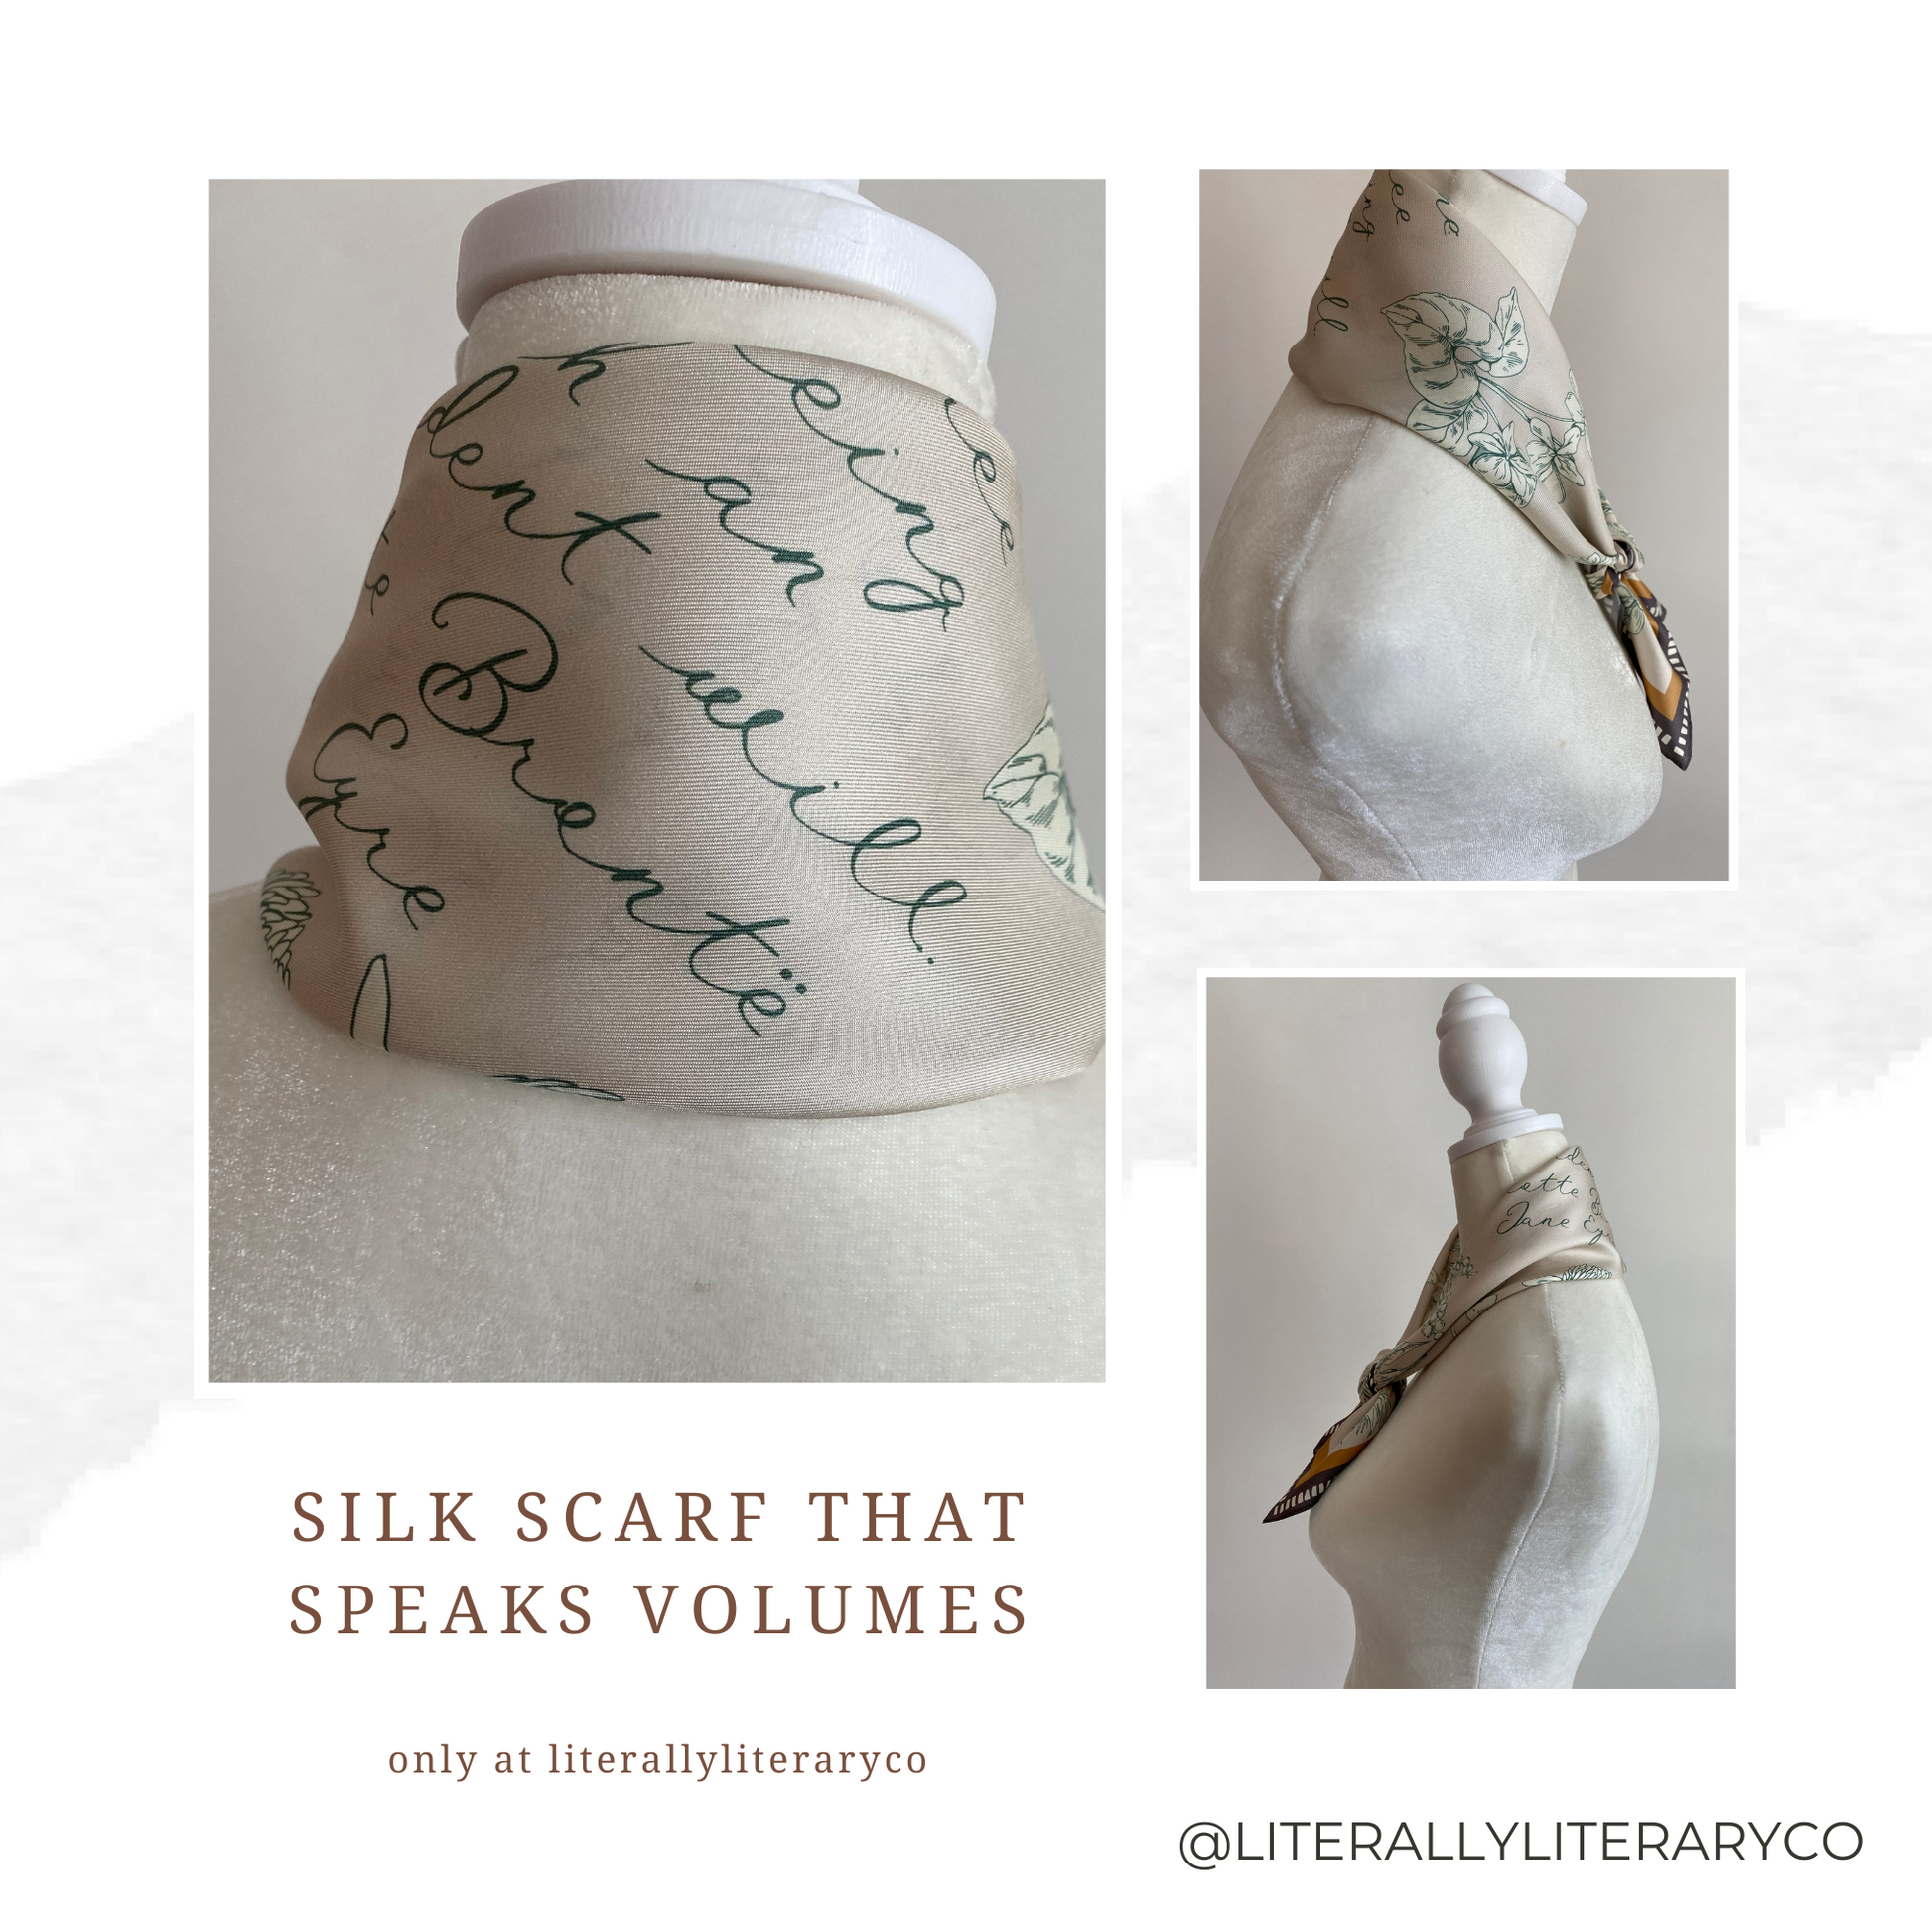 This Jane Eyre Quote silk scarf features the quote &quot;I am no bird&quot; from Jane Eyre, printed in an elegant calligraphy font. It is made from high-quality silk and has a luxurious sheen and soft texture with stunning botanical motif that complements the text.